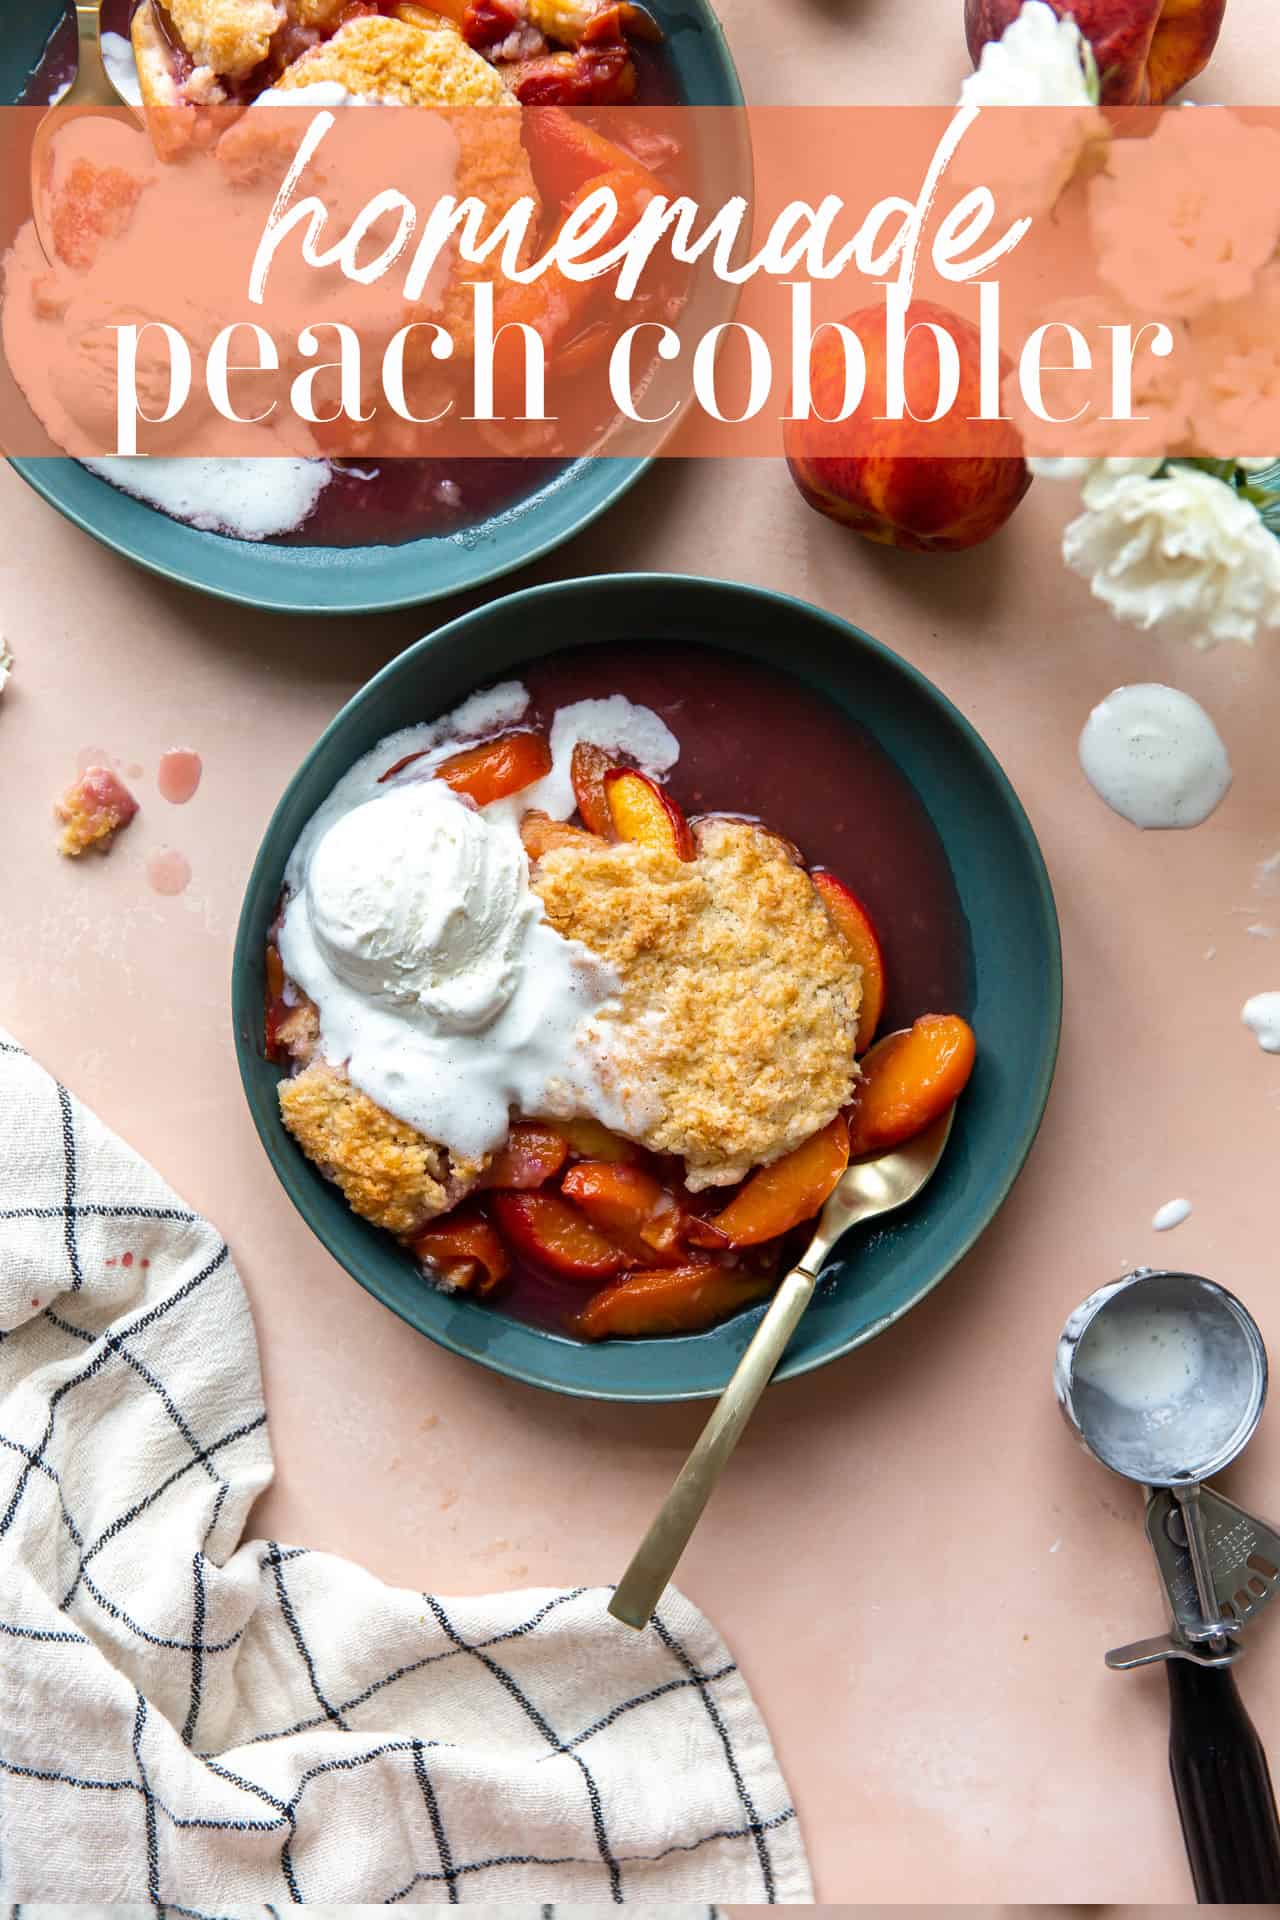 Bowl of dished up peach cobbler served with ice cream.